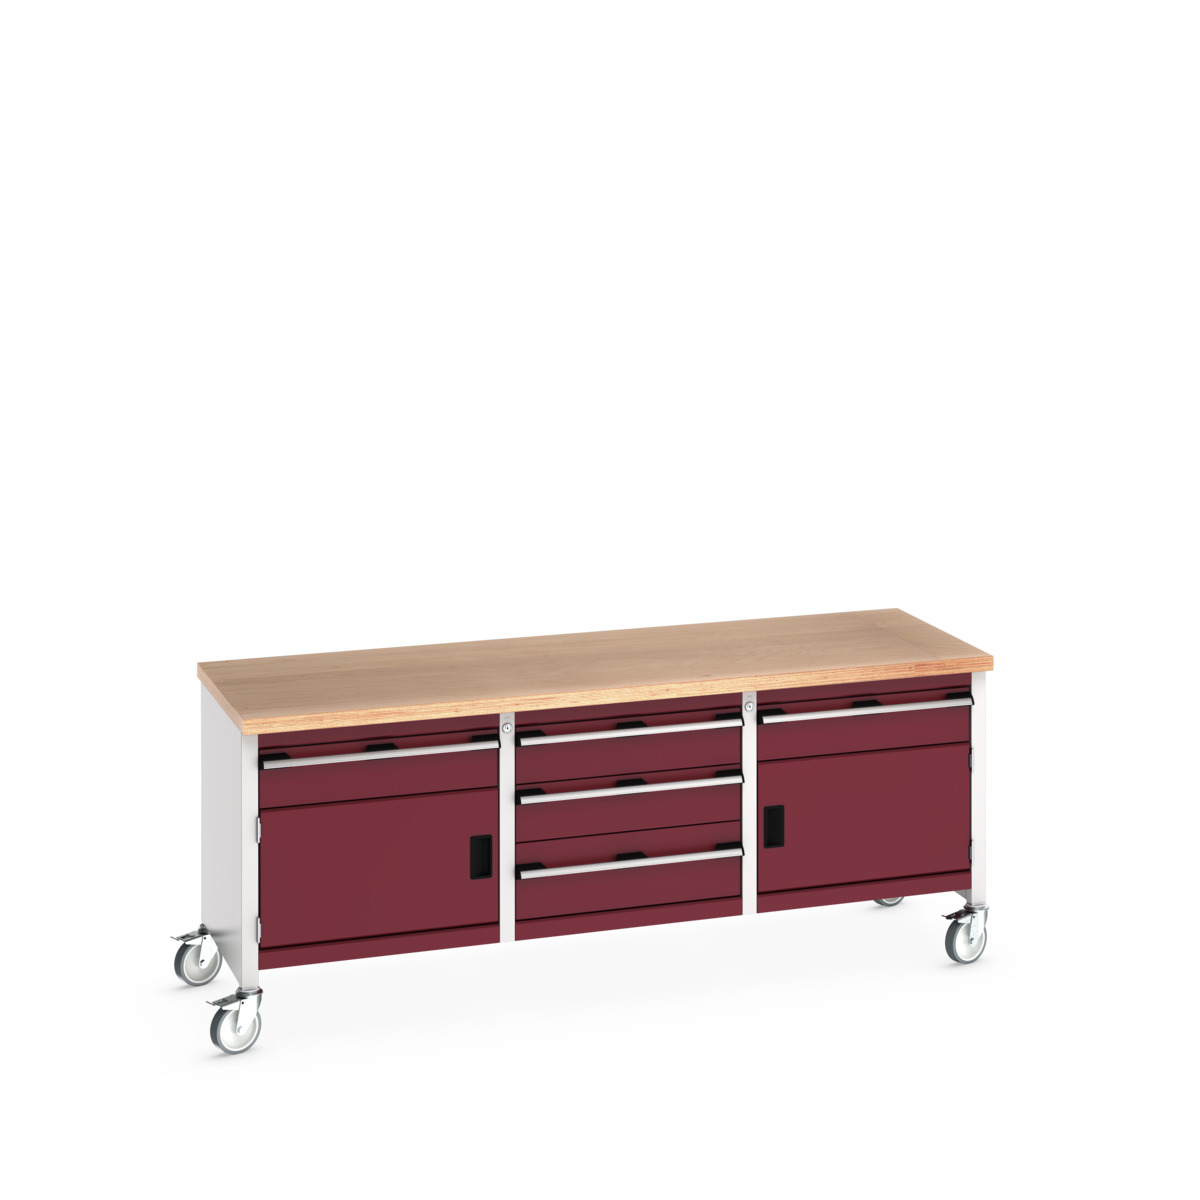 41002133.24V - cubio mobile storage bench (mpx)